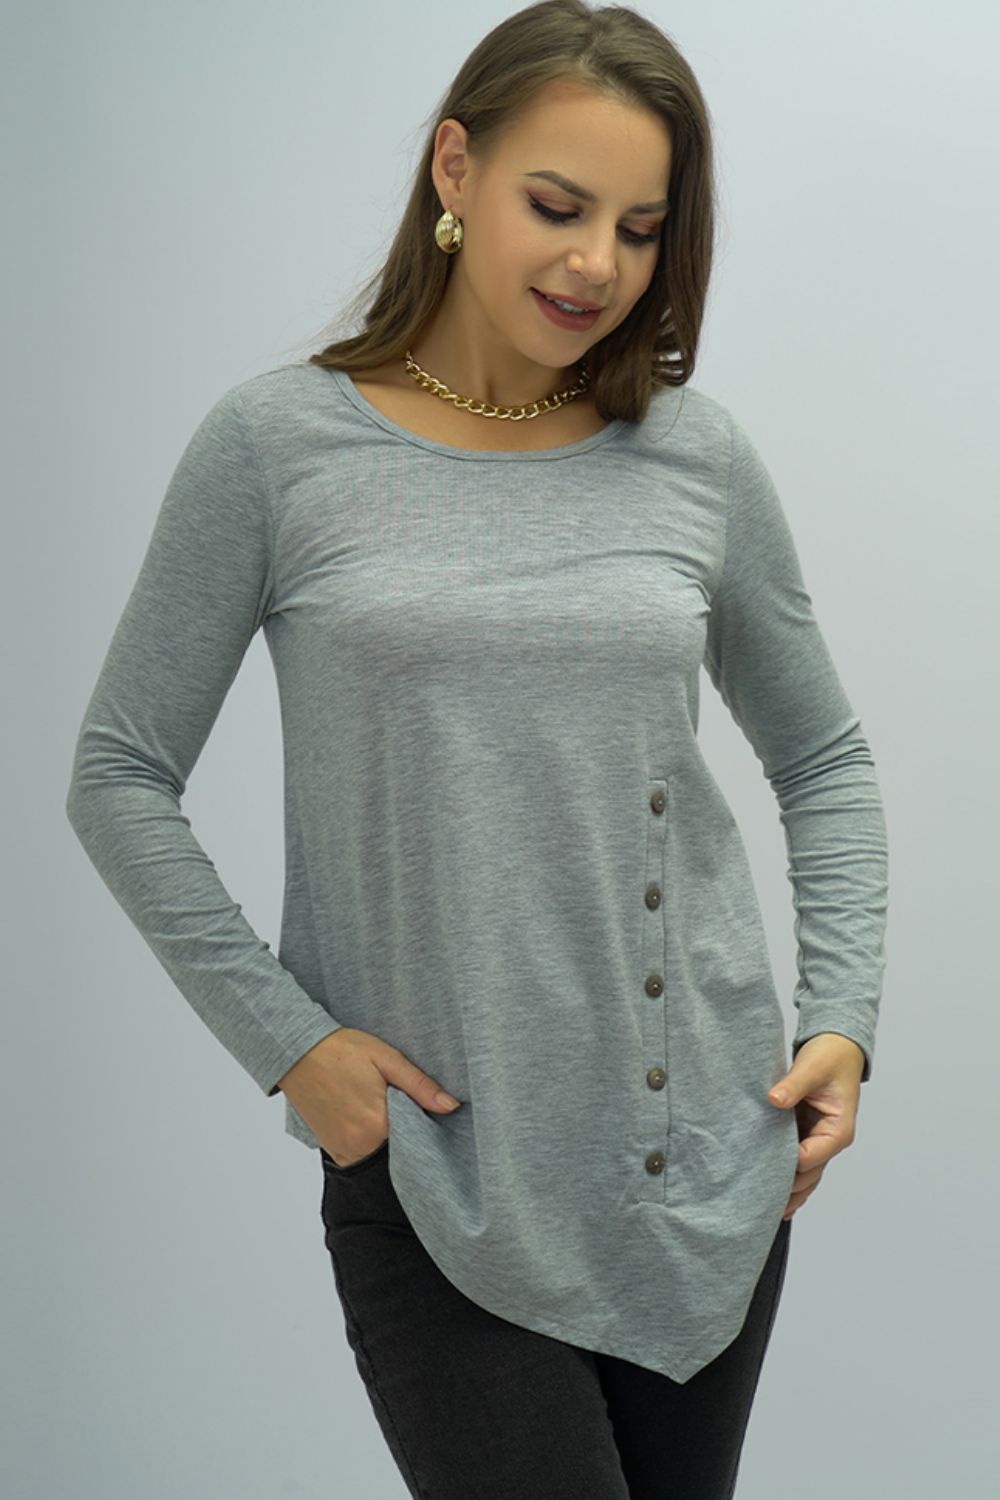 Women’s Buttoned Long Sleeve Round Neck Tee